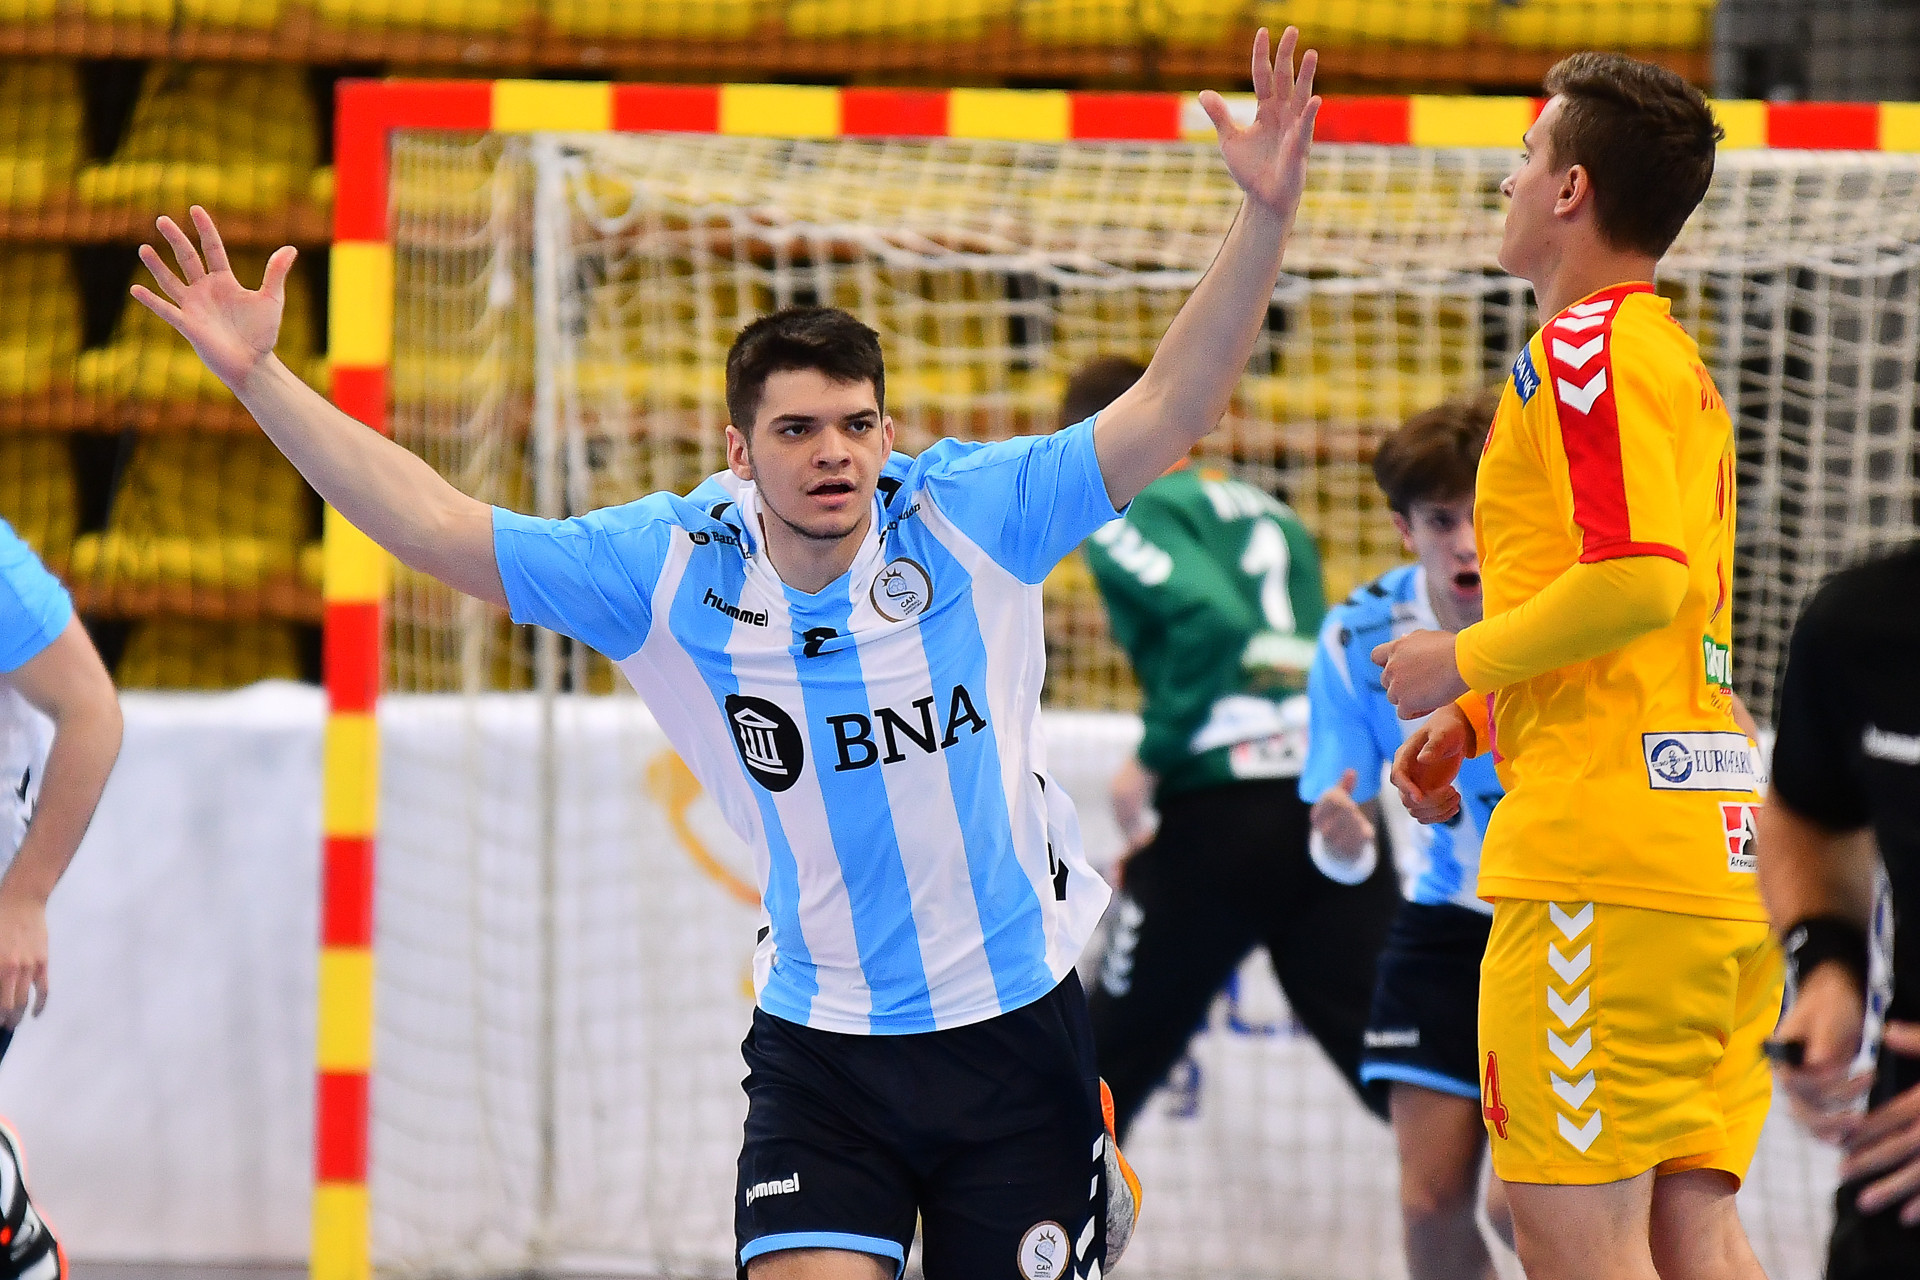 Argentina subjected hosts North Macedonia to a day one defeat ©IHF